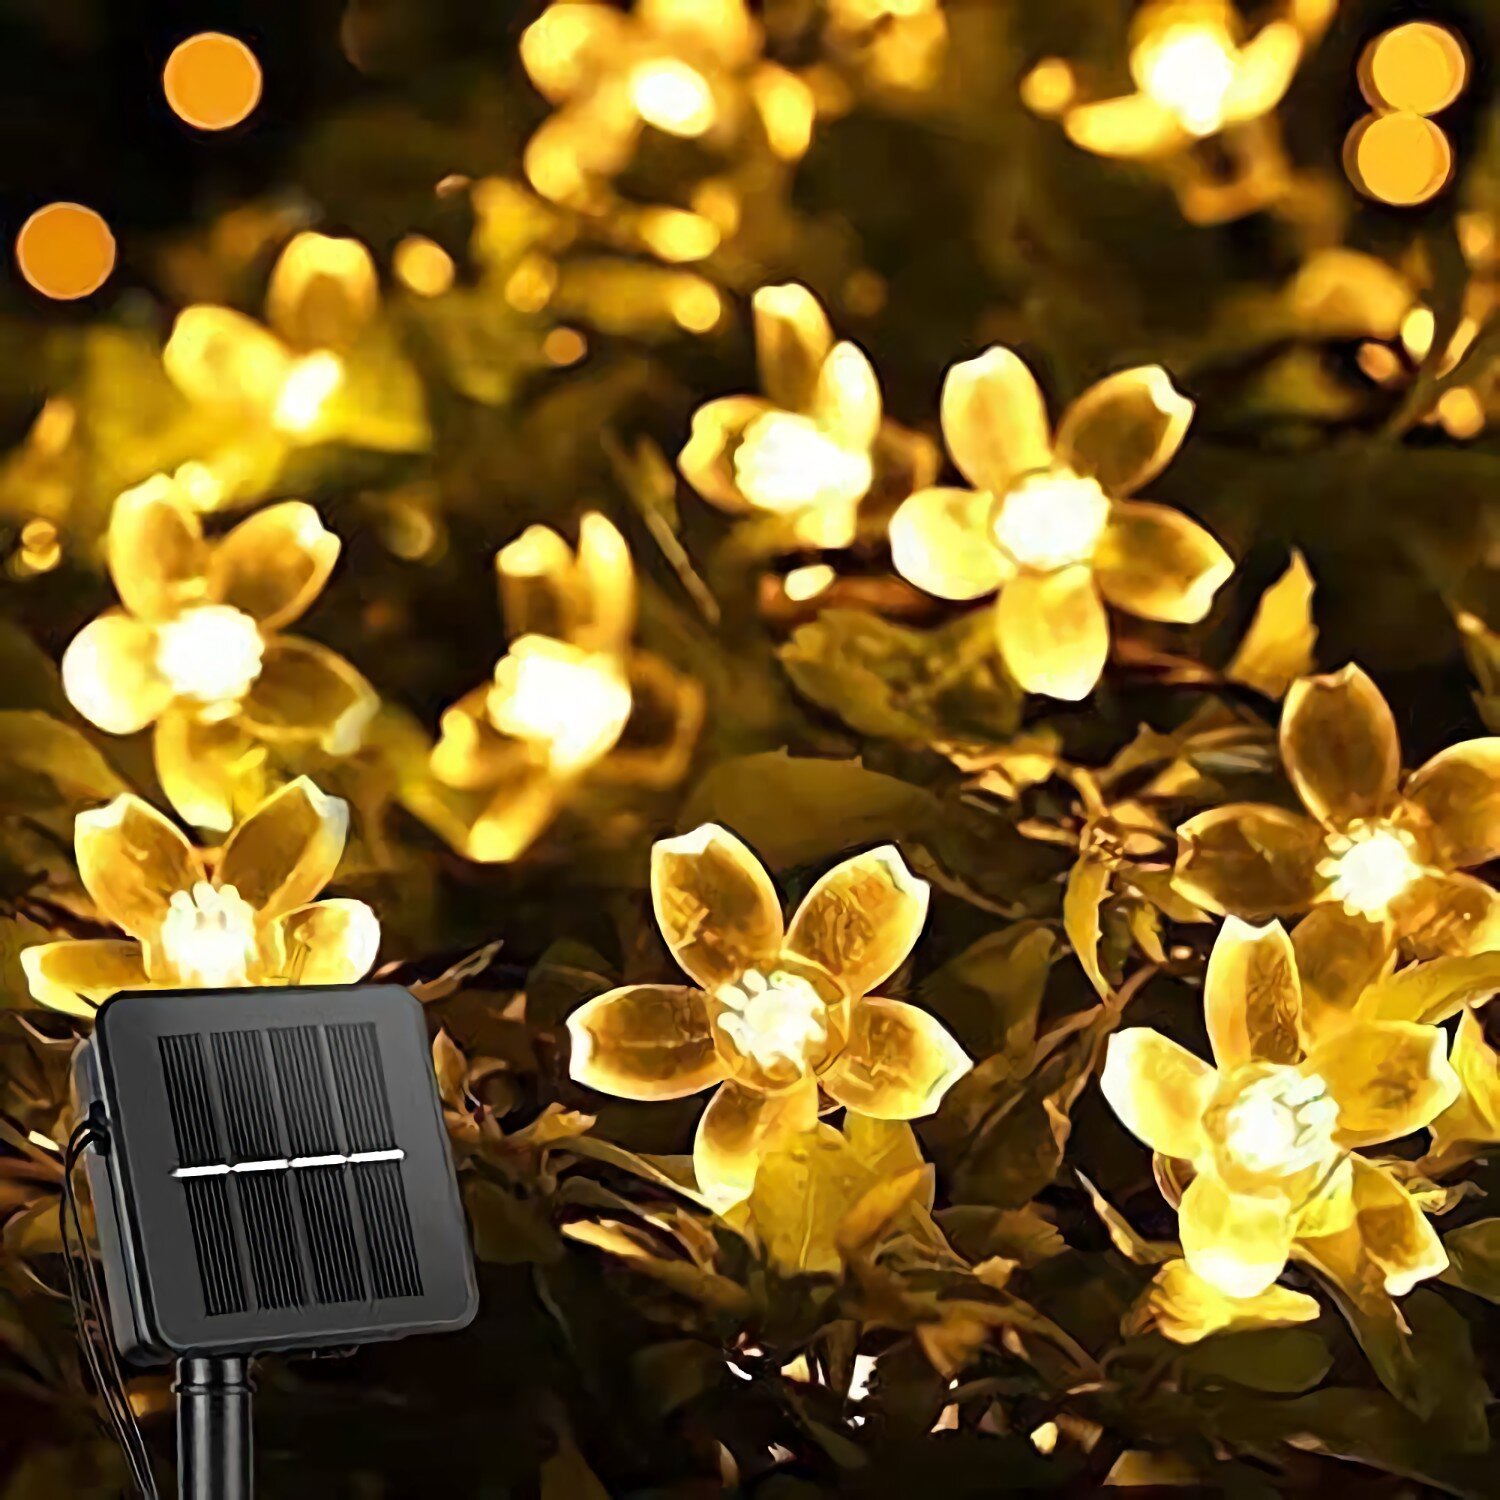 Patio Lawn Warm White 2 Pack Solar String Lights 22ft 50LED Cherry Blossom Fairy String Lights Waterproof for Outdoor Christmas Garden Holiday and Festivals Decorations 